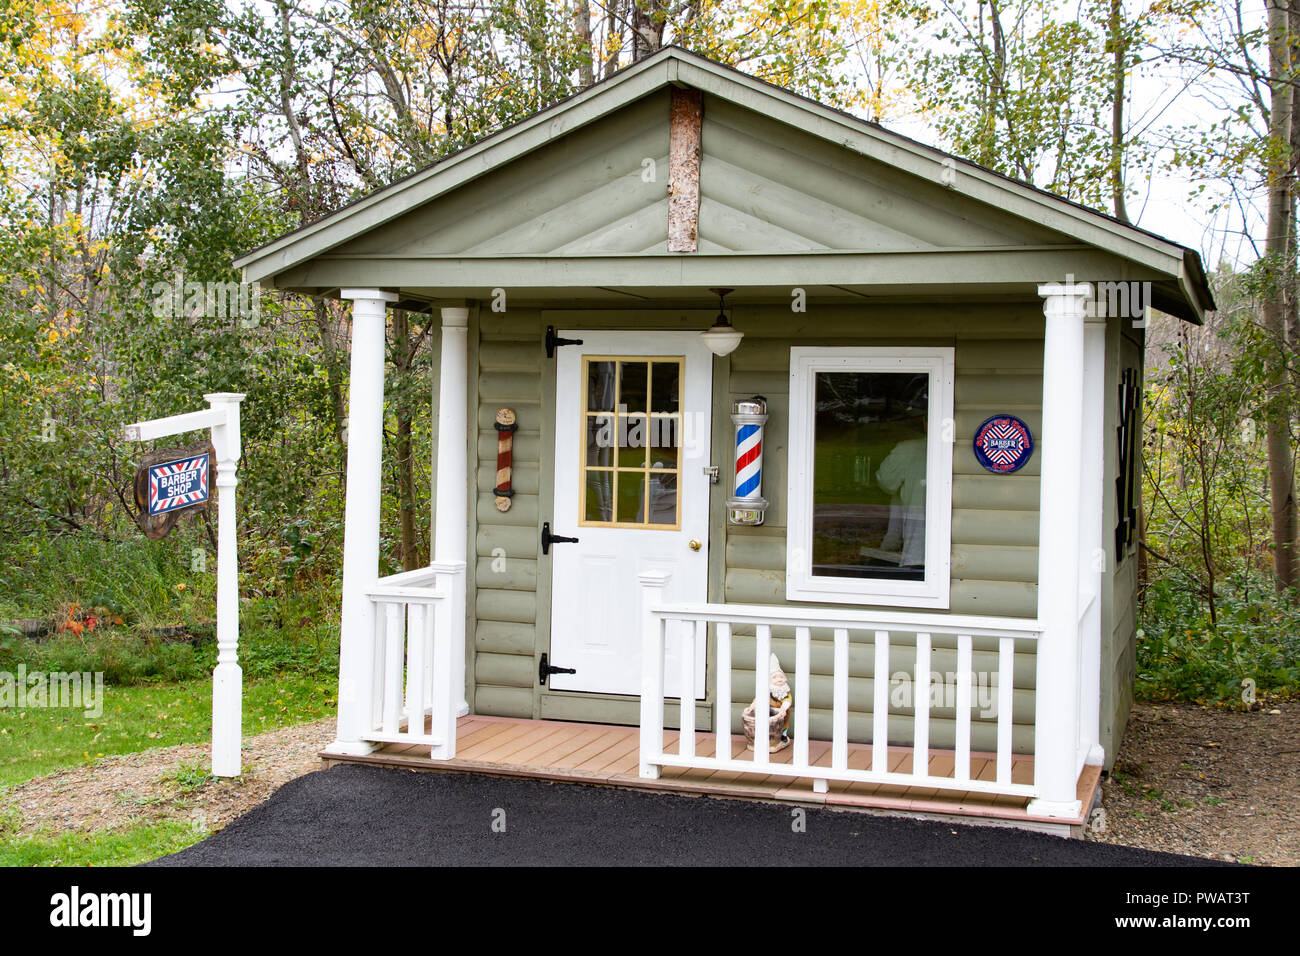 A miniature barber shop building, part of the Route 66 buildings on display in Speculator, NY USA donated by John Van-Buiten to the community. Stock Photo